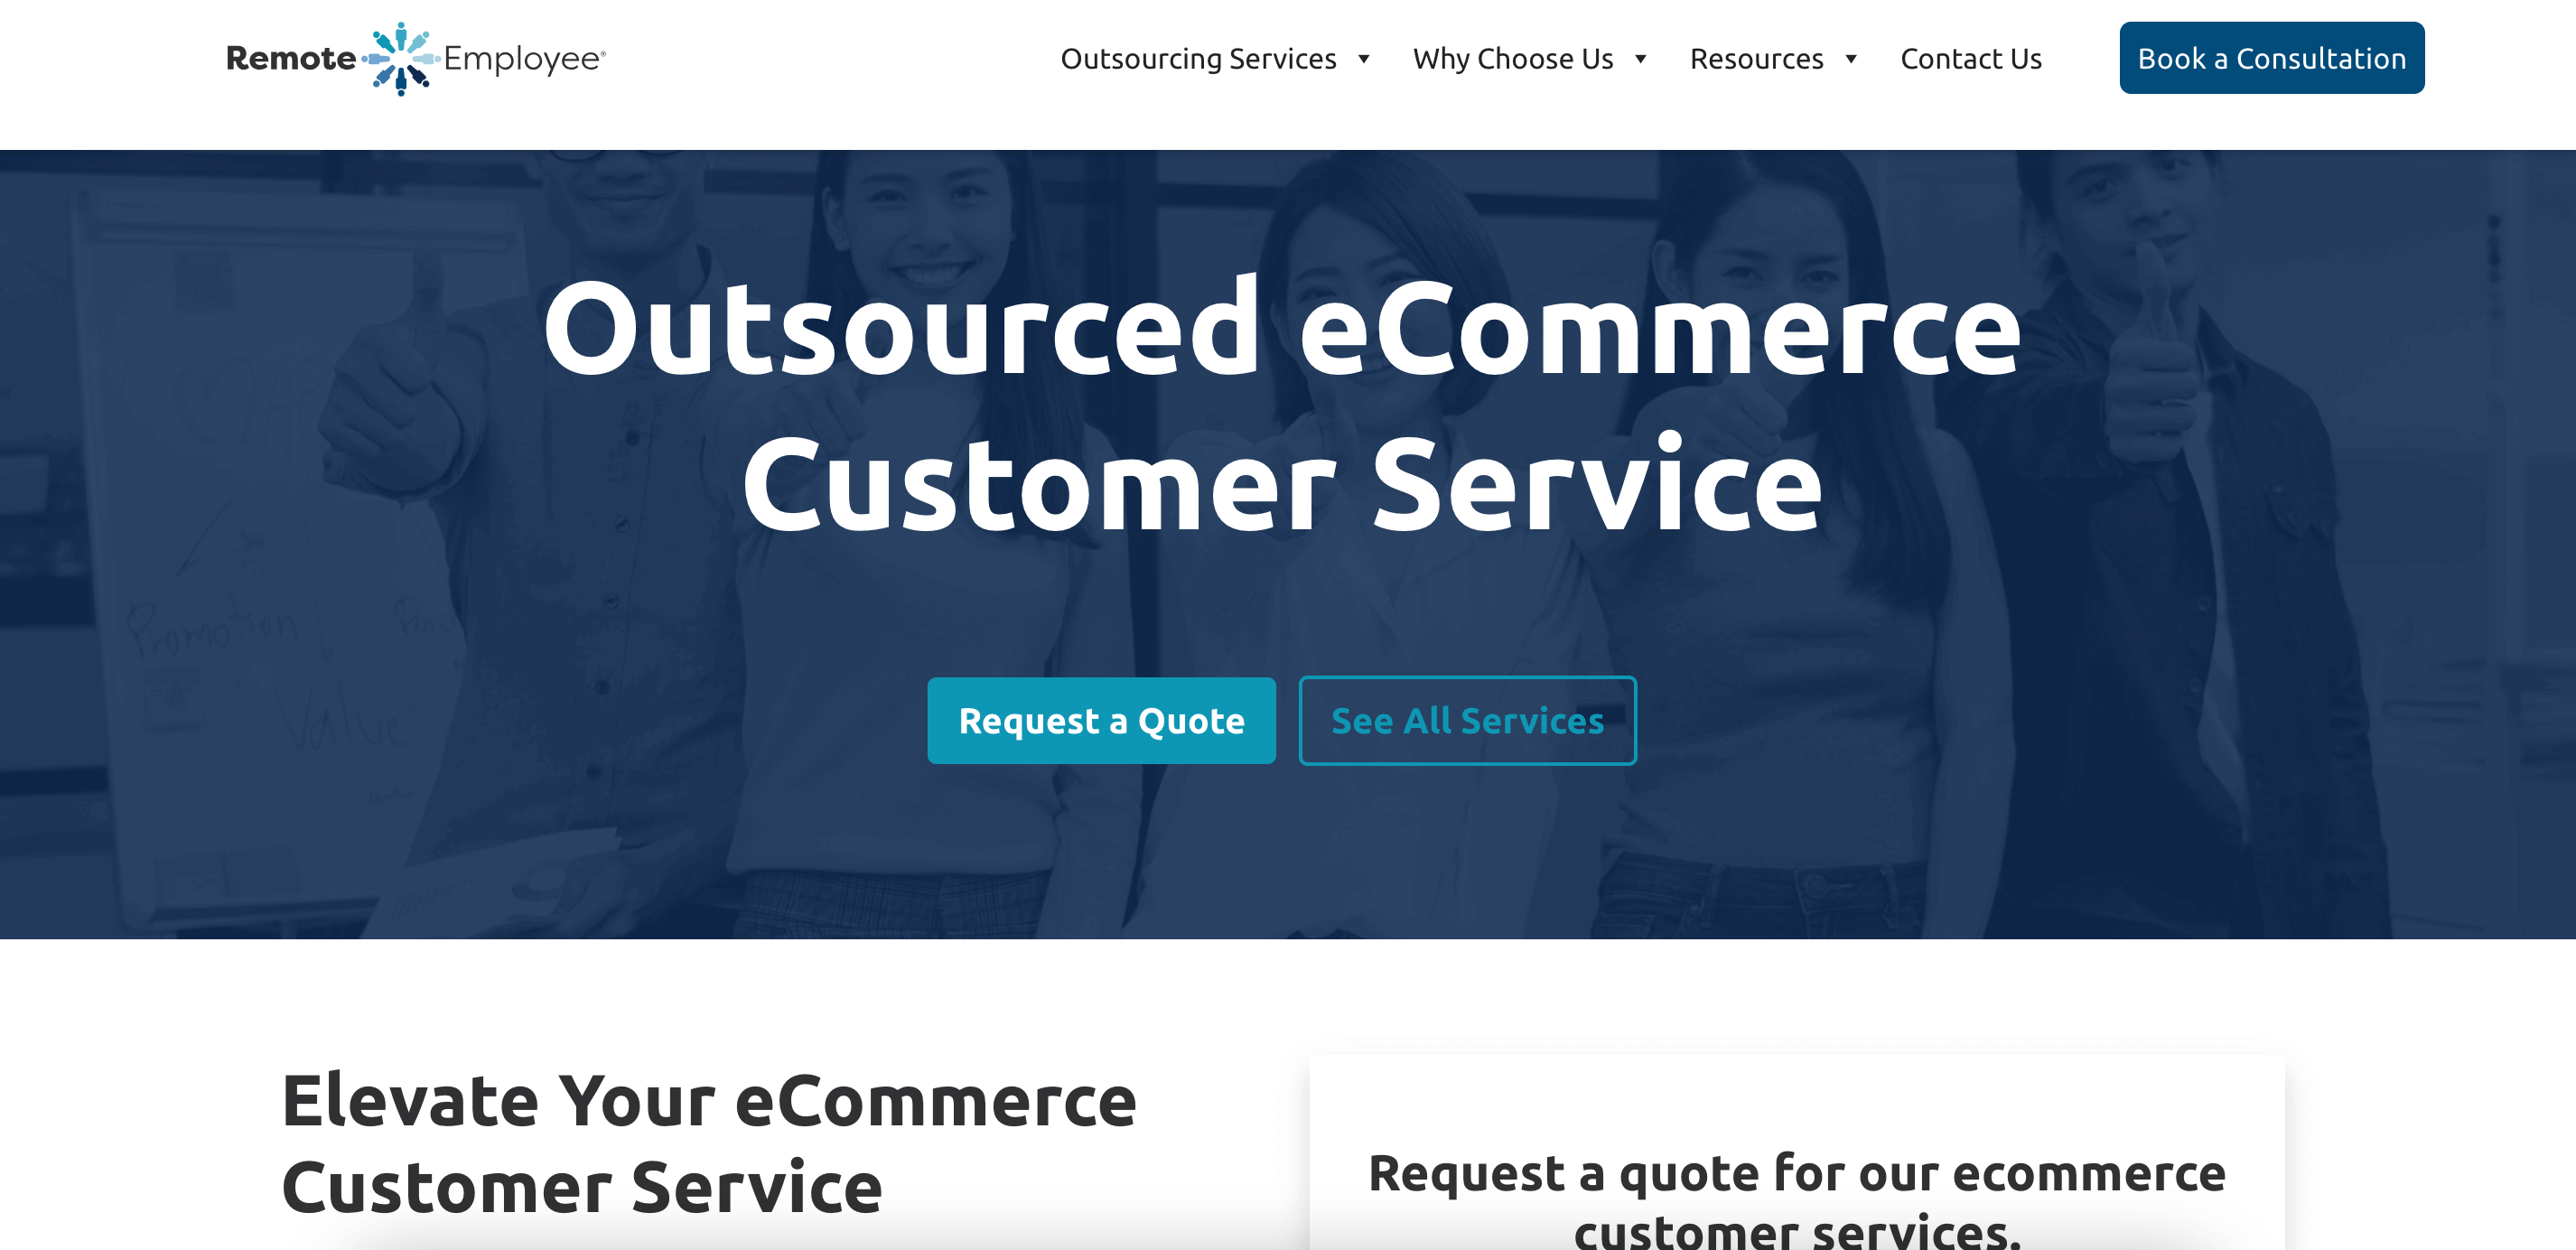 Top Companies For Outsourcing eCommerce Customer Service